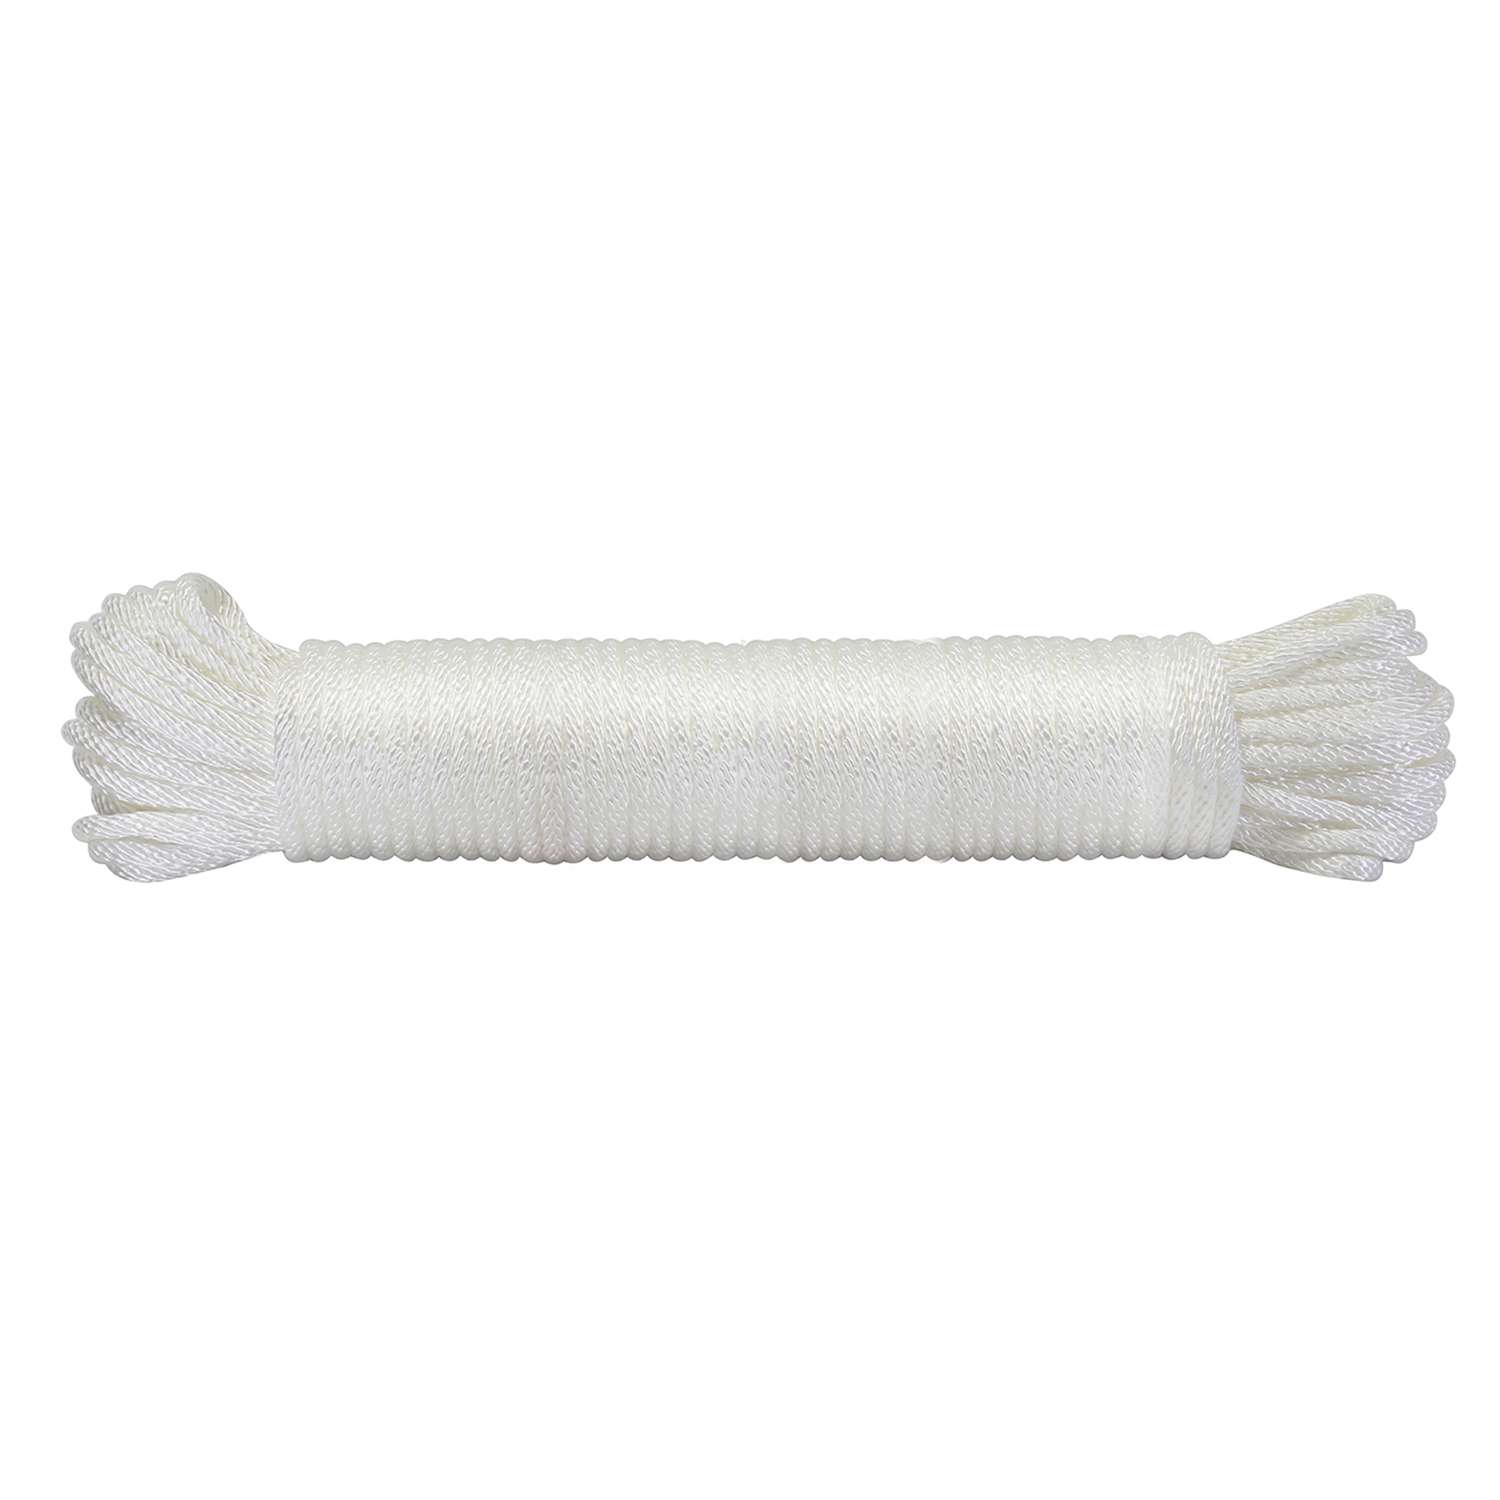 Ace 1/4 in x 100 ft White Solid Braided Nylon Rope